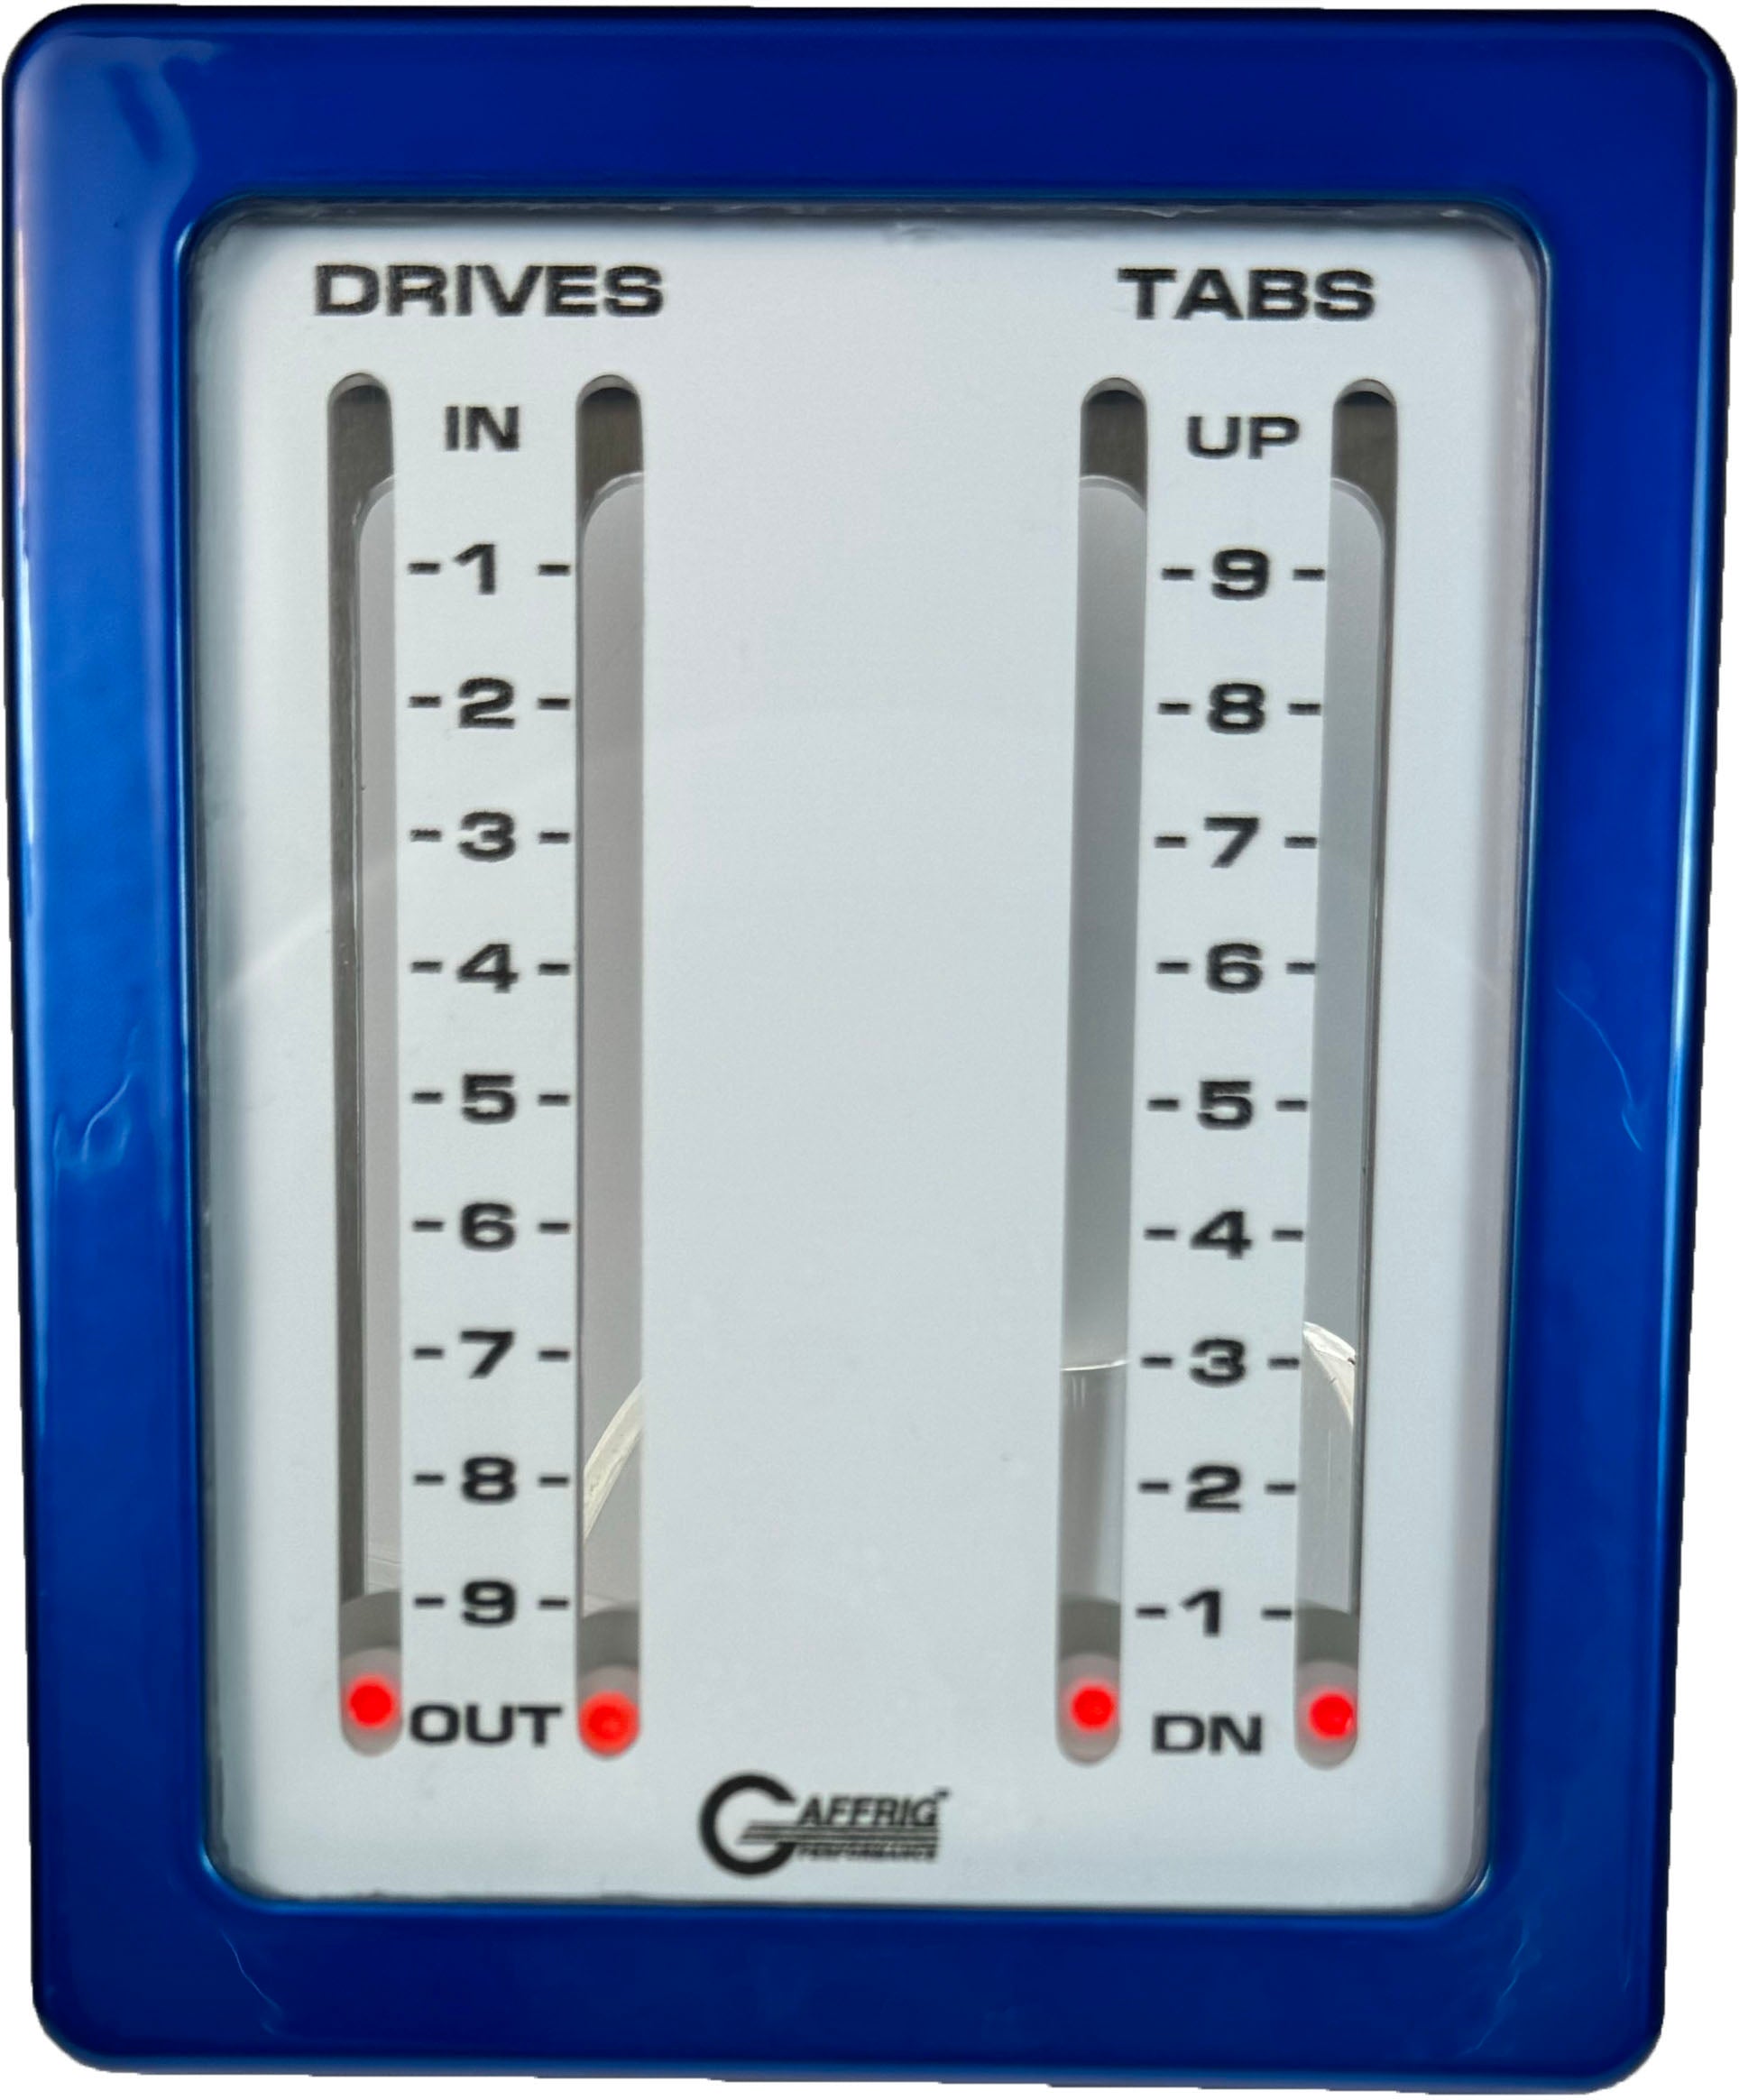 GAFFRIG PART #205 MECHANICAL INDICATOR, 2 DRIVES/2 TABS, MERCURY- CARD - WHITE DIAL BLUE